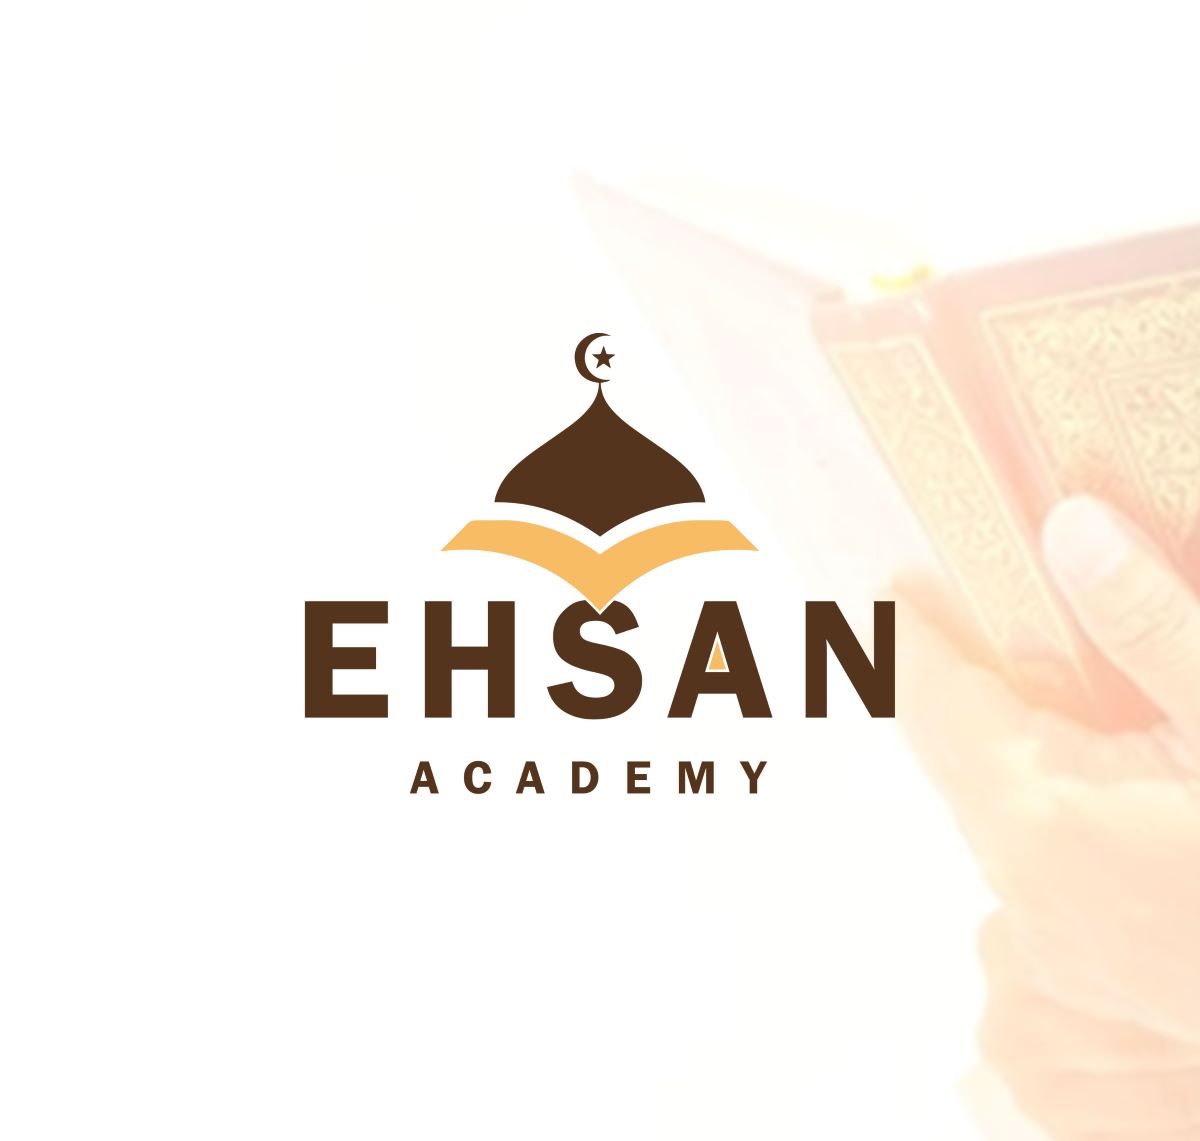 ehsan academy for teaching online quran recitation and online quran memorization rules of stopping in quran